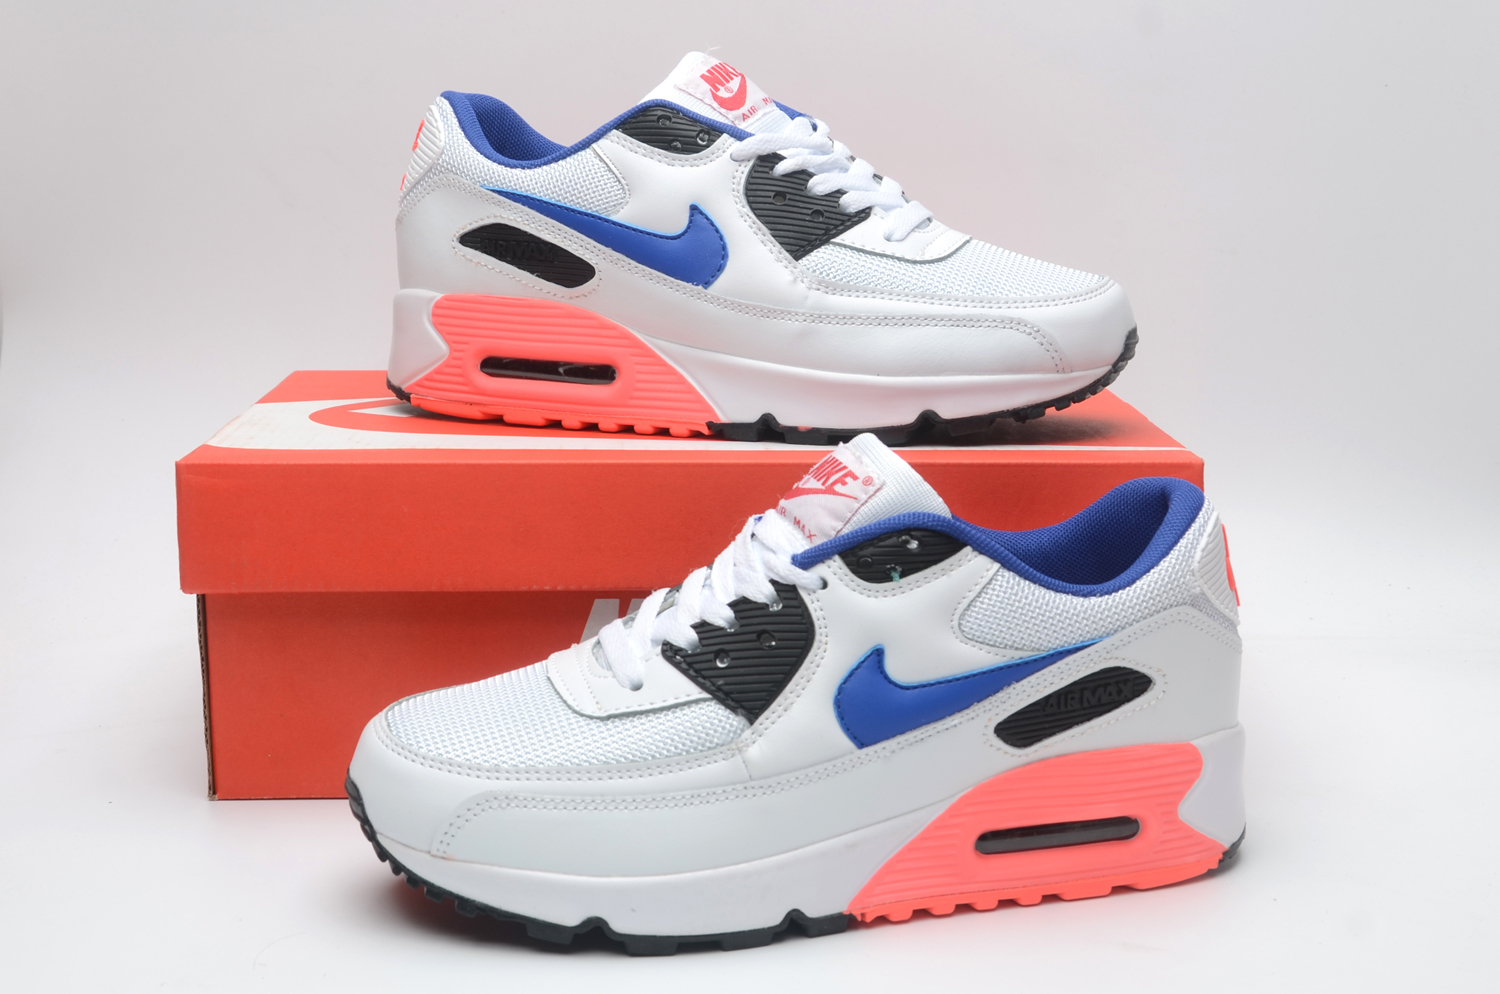 Women's Running weapon Air Max 90 Shoes 032